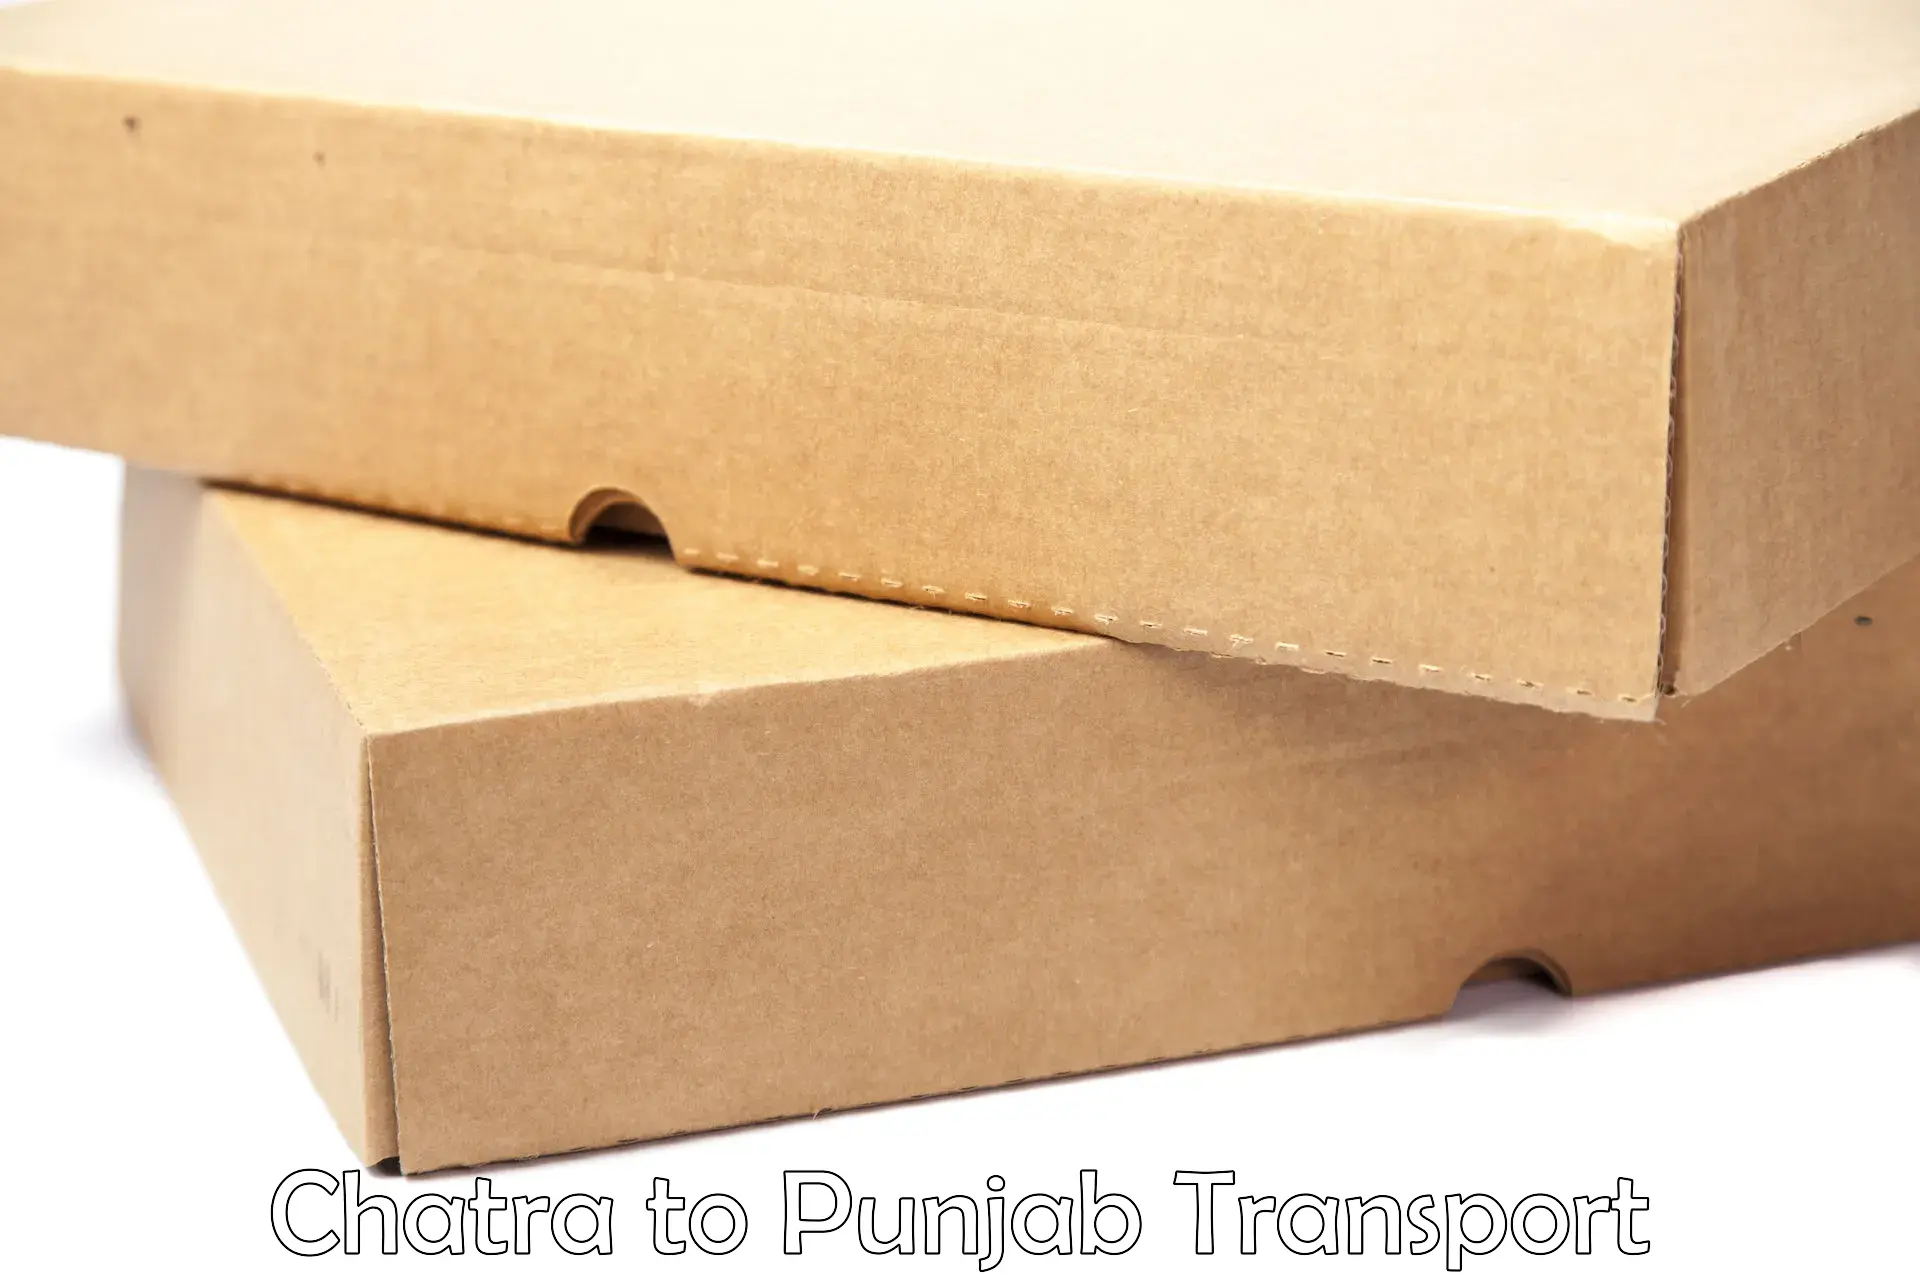 Domestic goods transportation services Chatra to Mohali